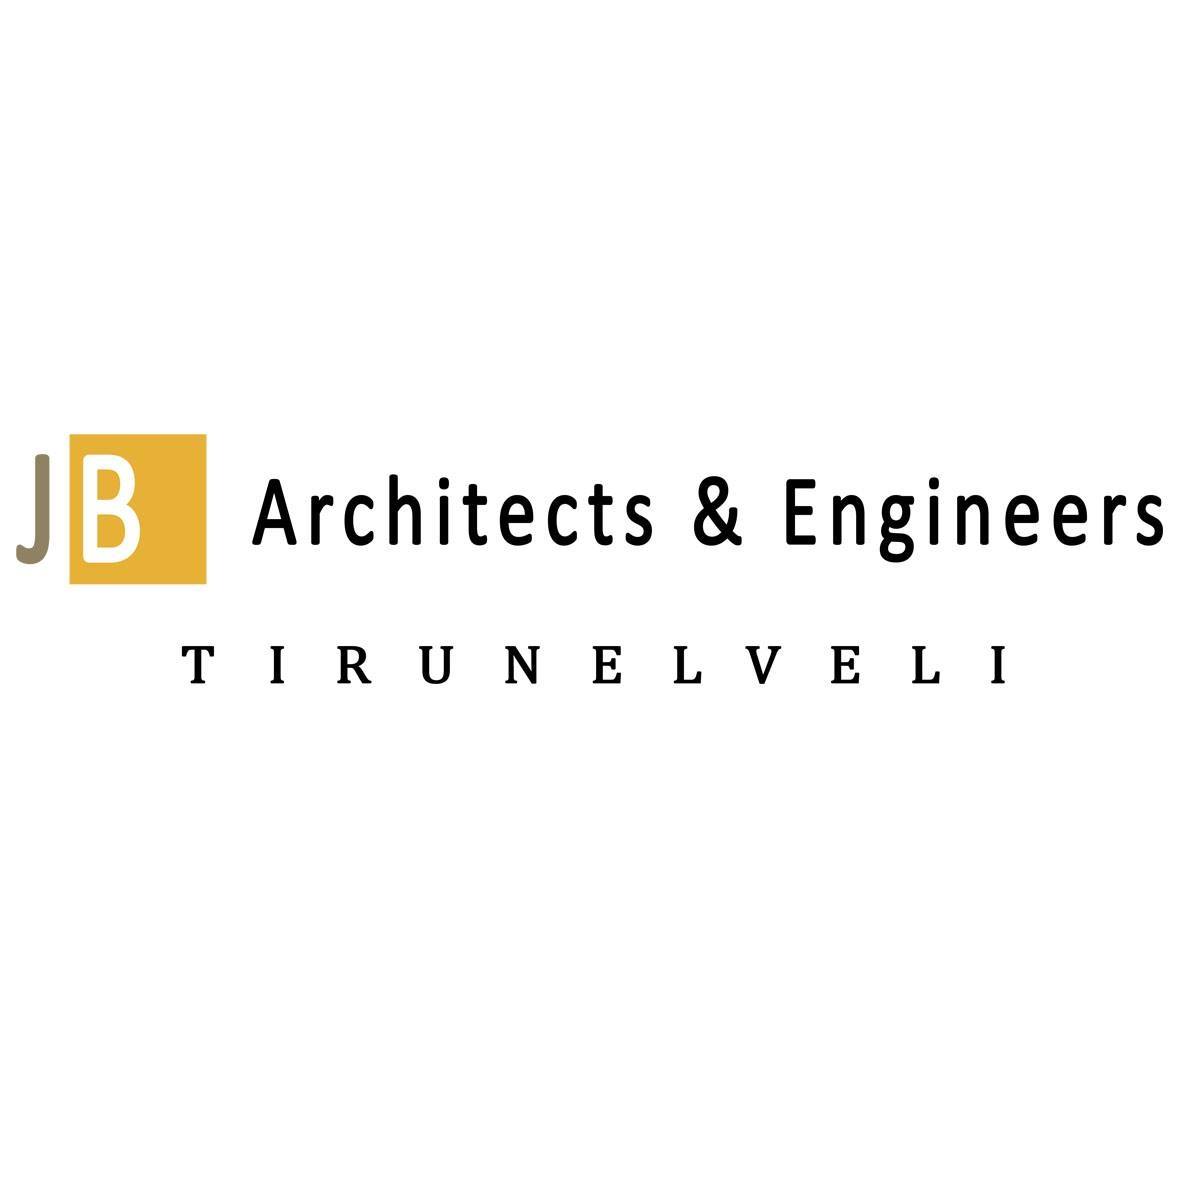 JB Architects & Engineers|Architect|Professional Services